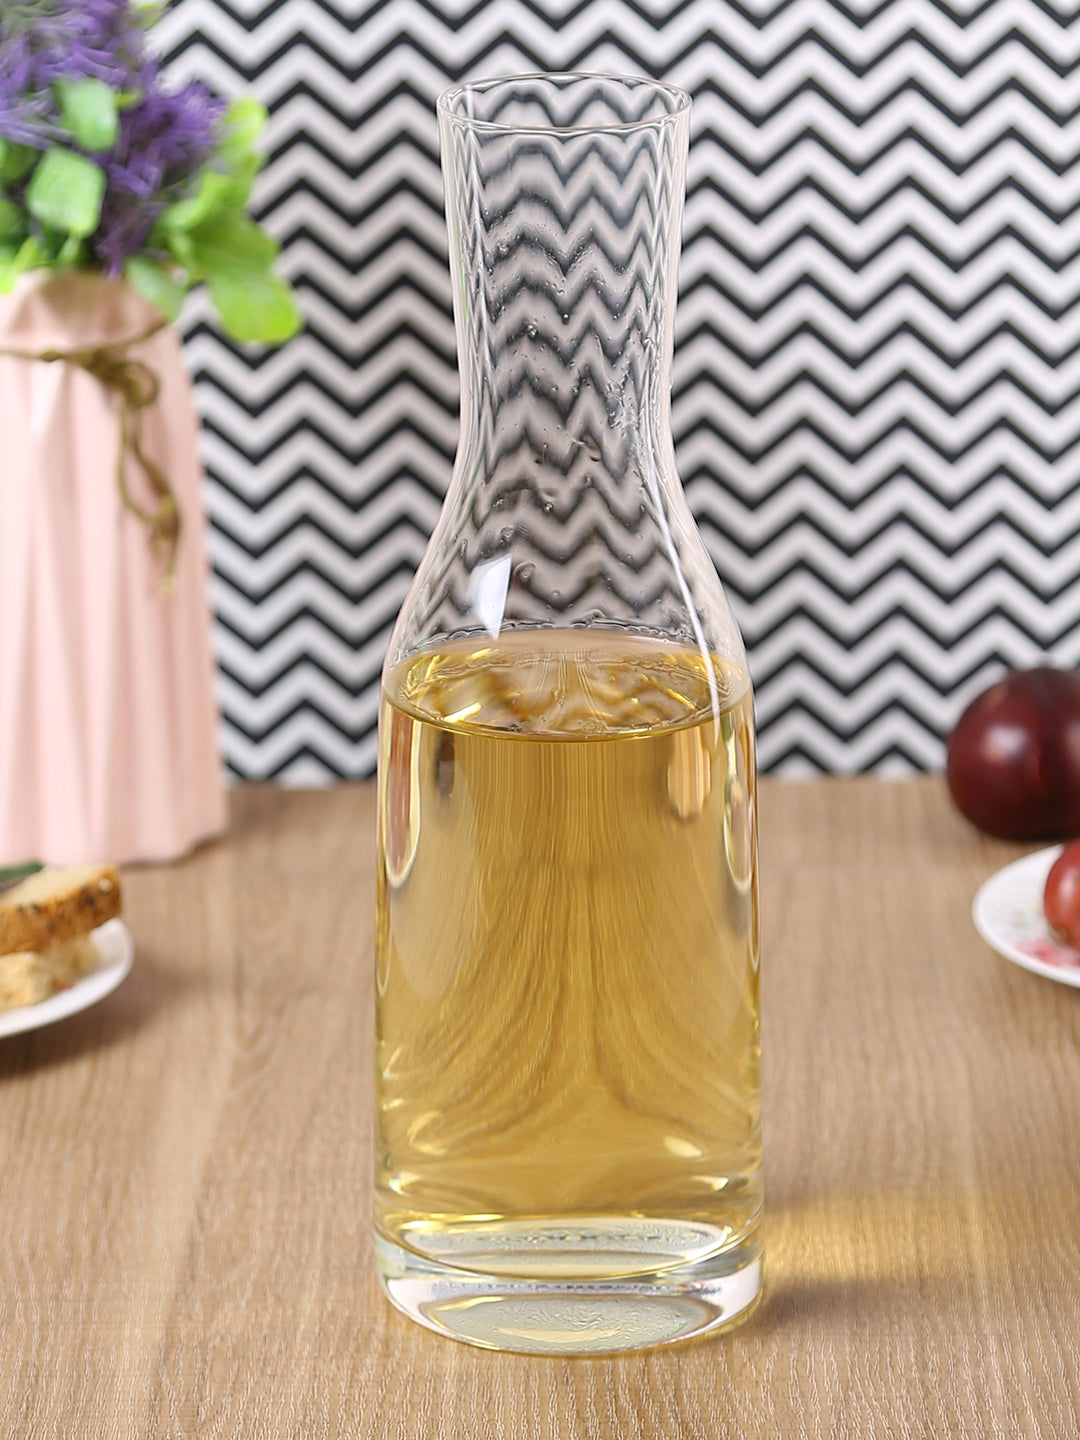 Premium-Quality Glass Decanter - Enhance your wine experience with exceptional clarity.